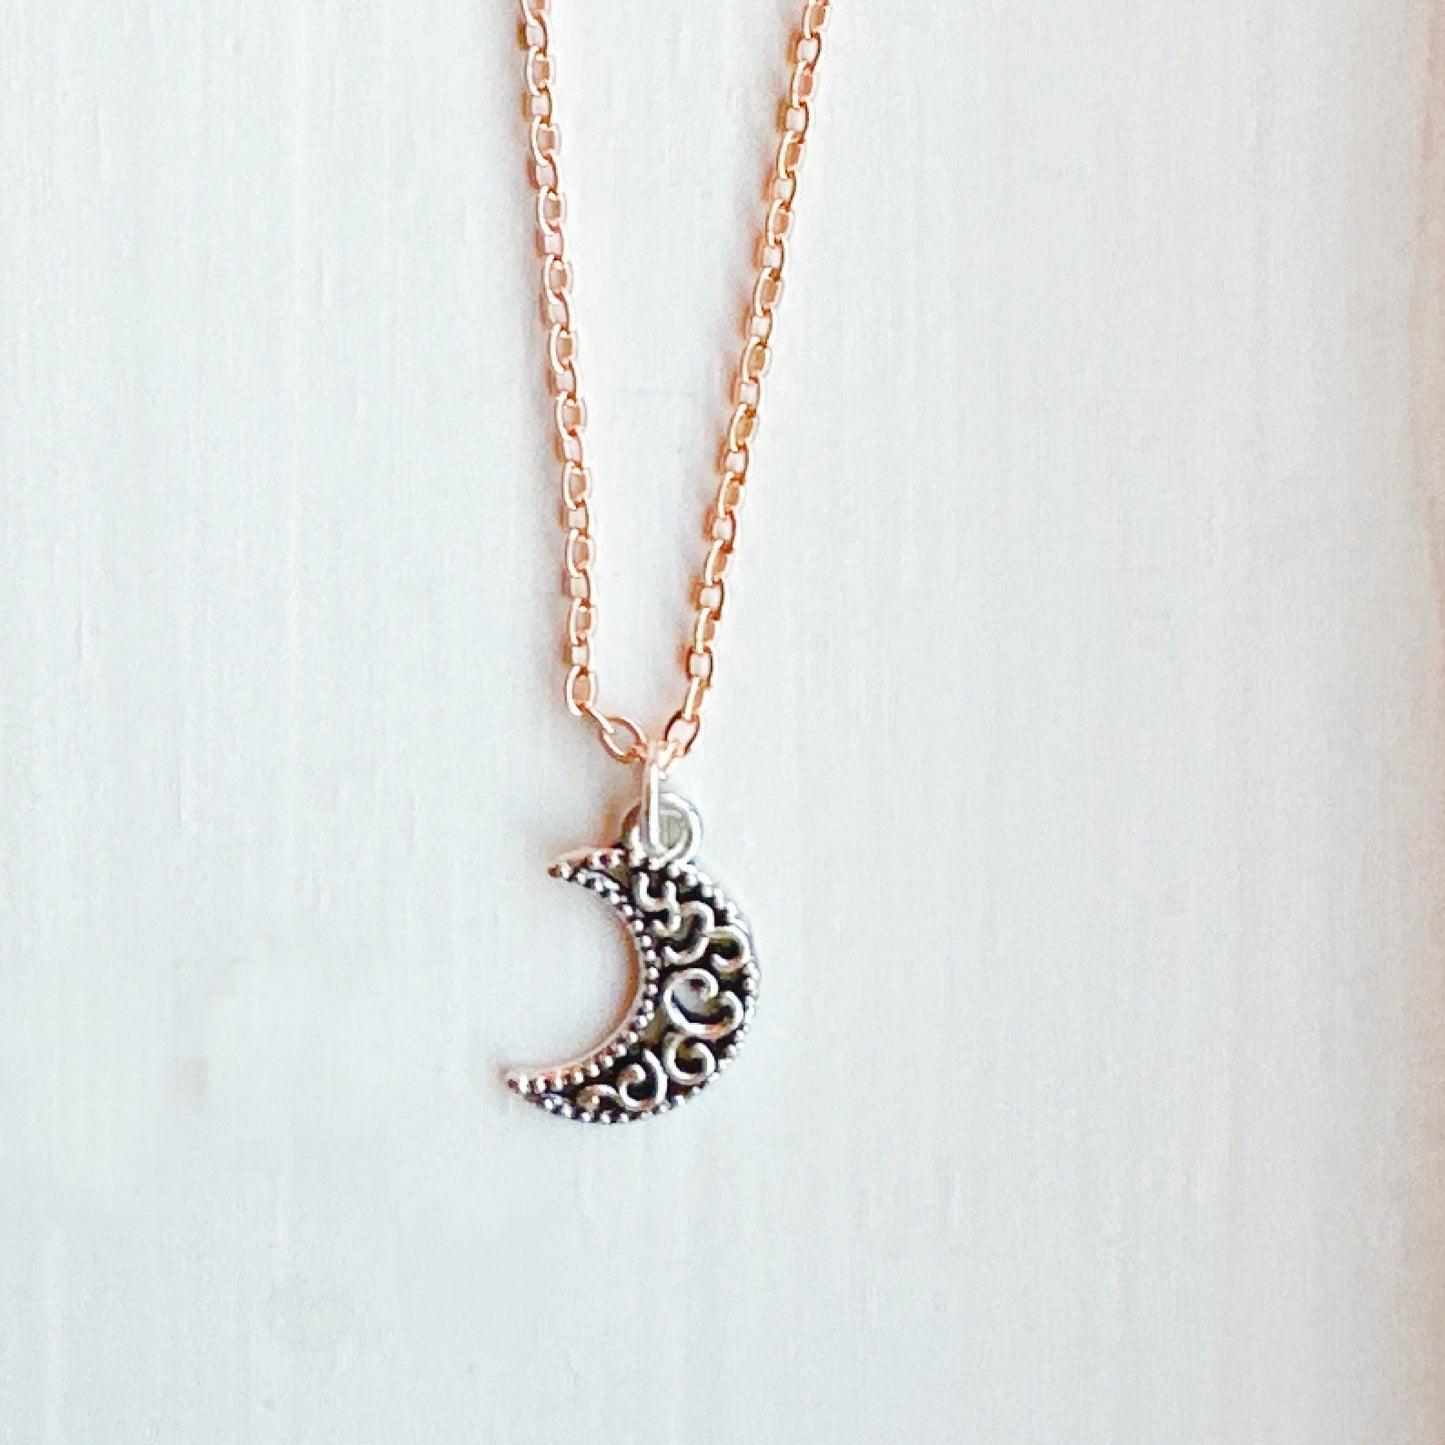 Patterned Crescent Moon Pendant Necklace